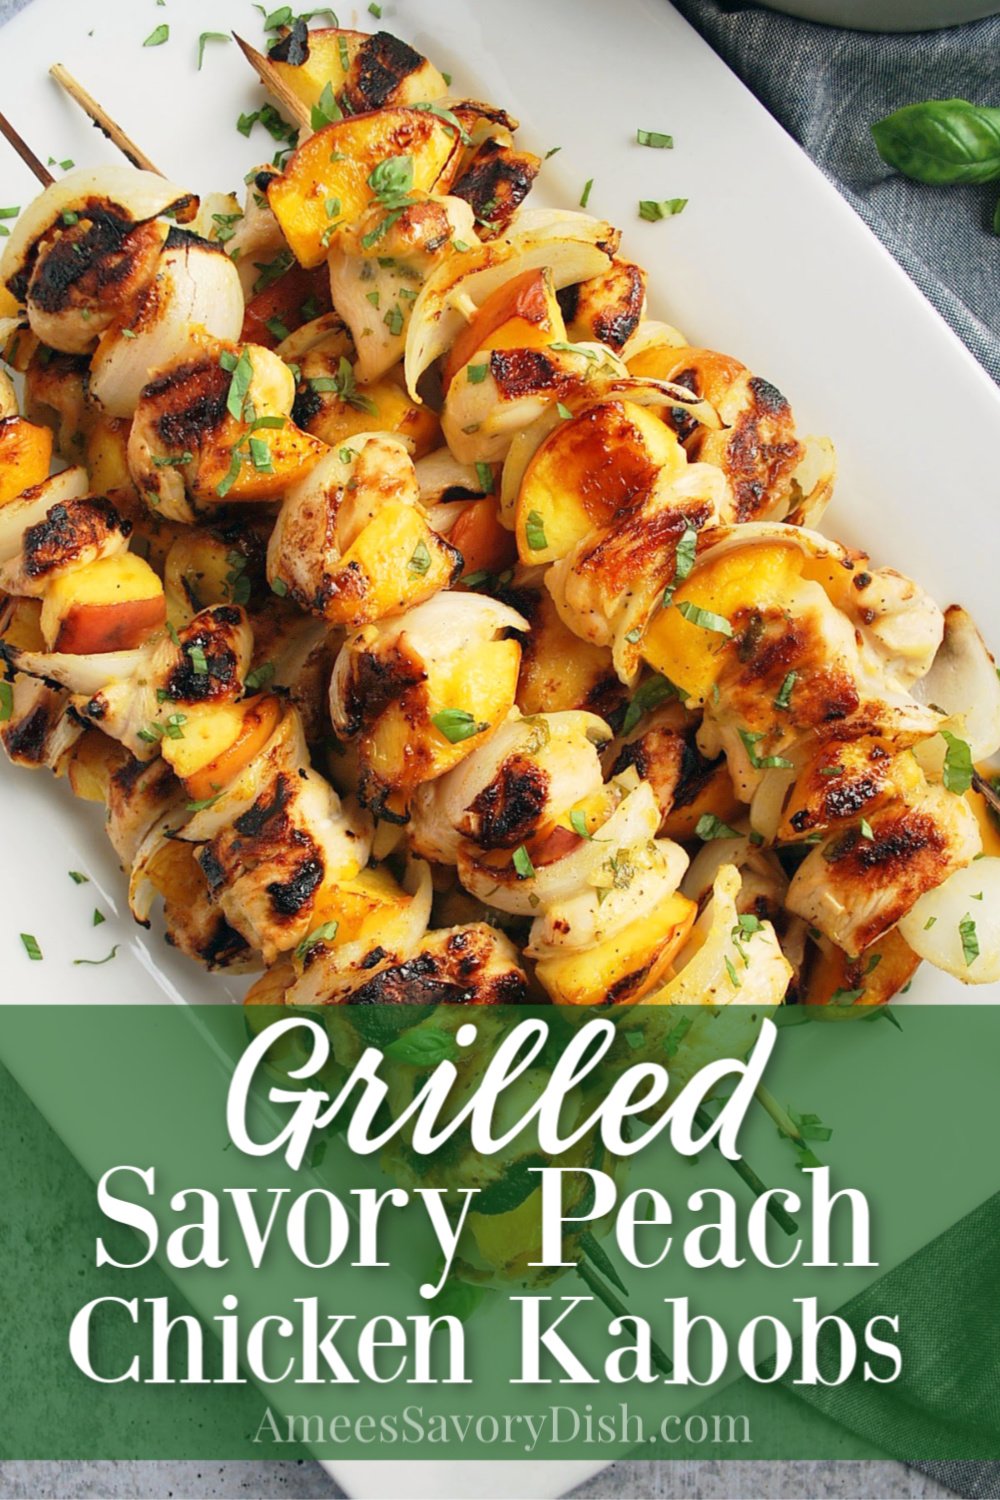 Flavorful grilled peach chicken kabobs made with boneless chicken breasts,  in-season fresh local peaches, and Vidalia onions marinated in a homemade peach vinaigrette.  #chickenkabobs #kabobs #peachchicken #chickenrecipe #grilledchicken #chicken via @Ameessavorydish